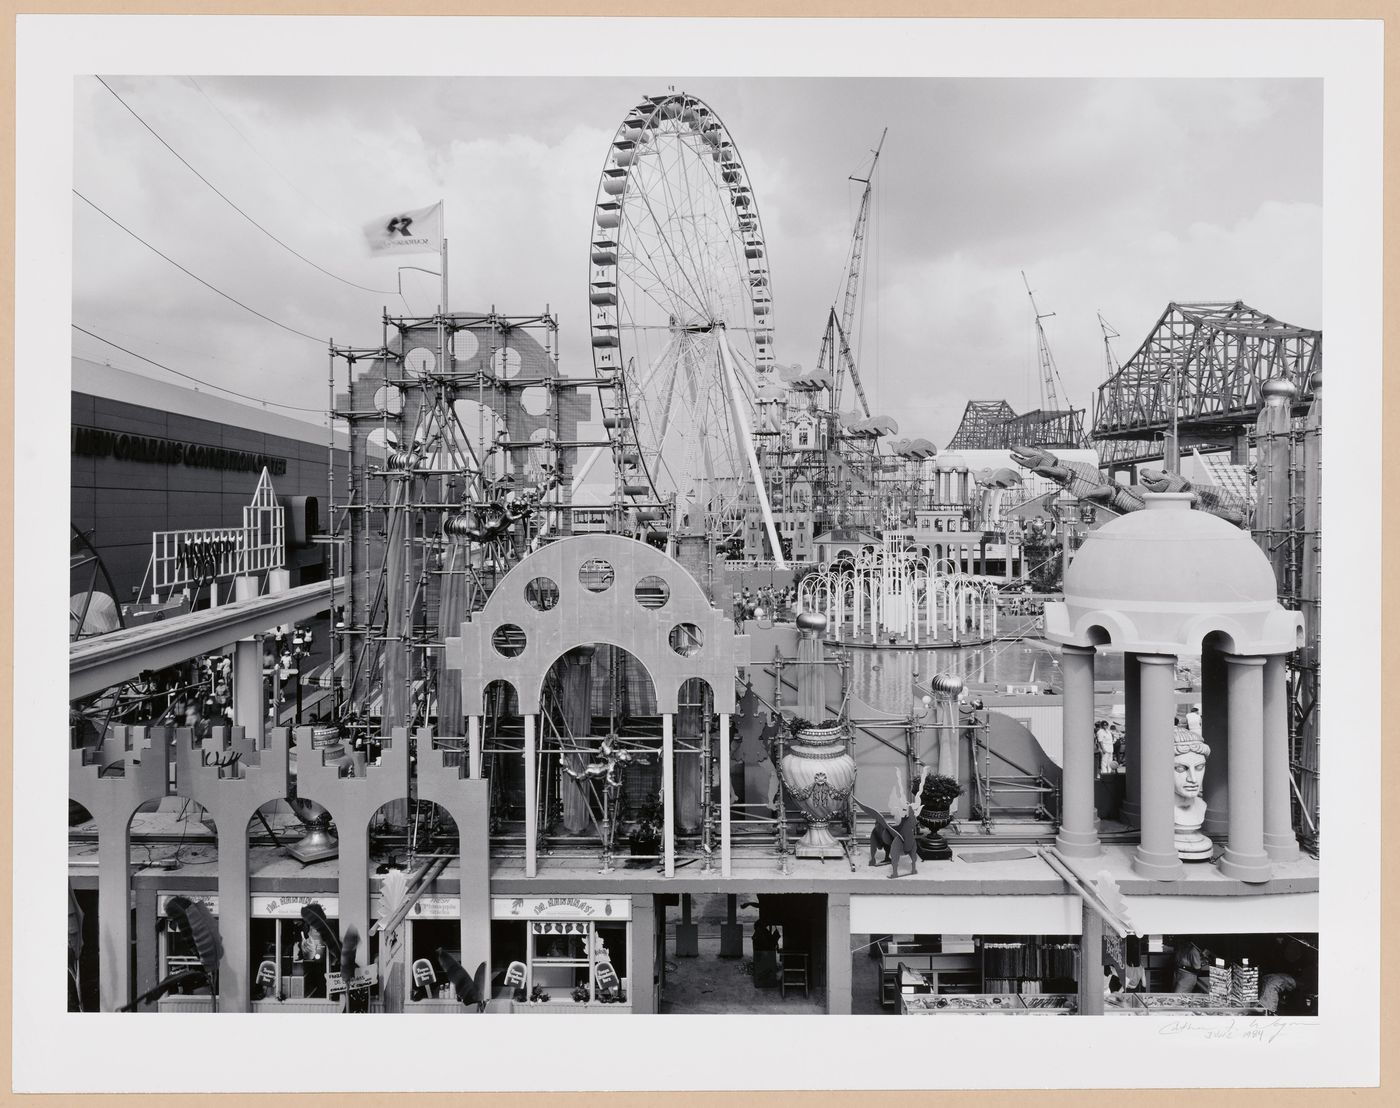 View of the Wonderwall with the Ferris wheel in the background, Louisiana World Exposition, New Orleans